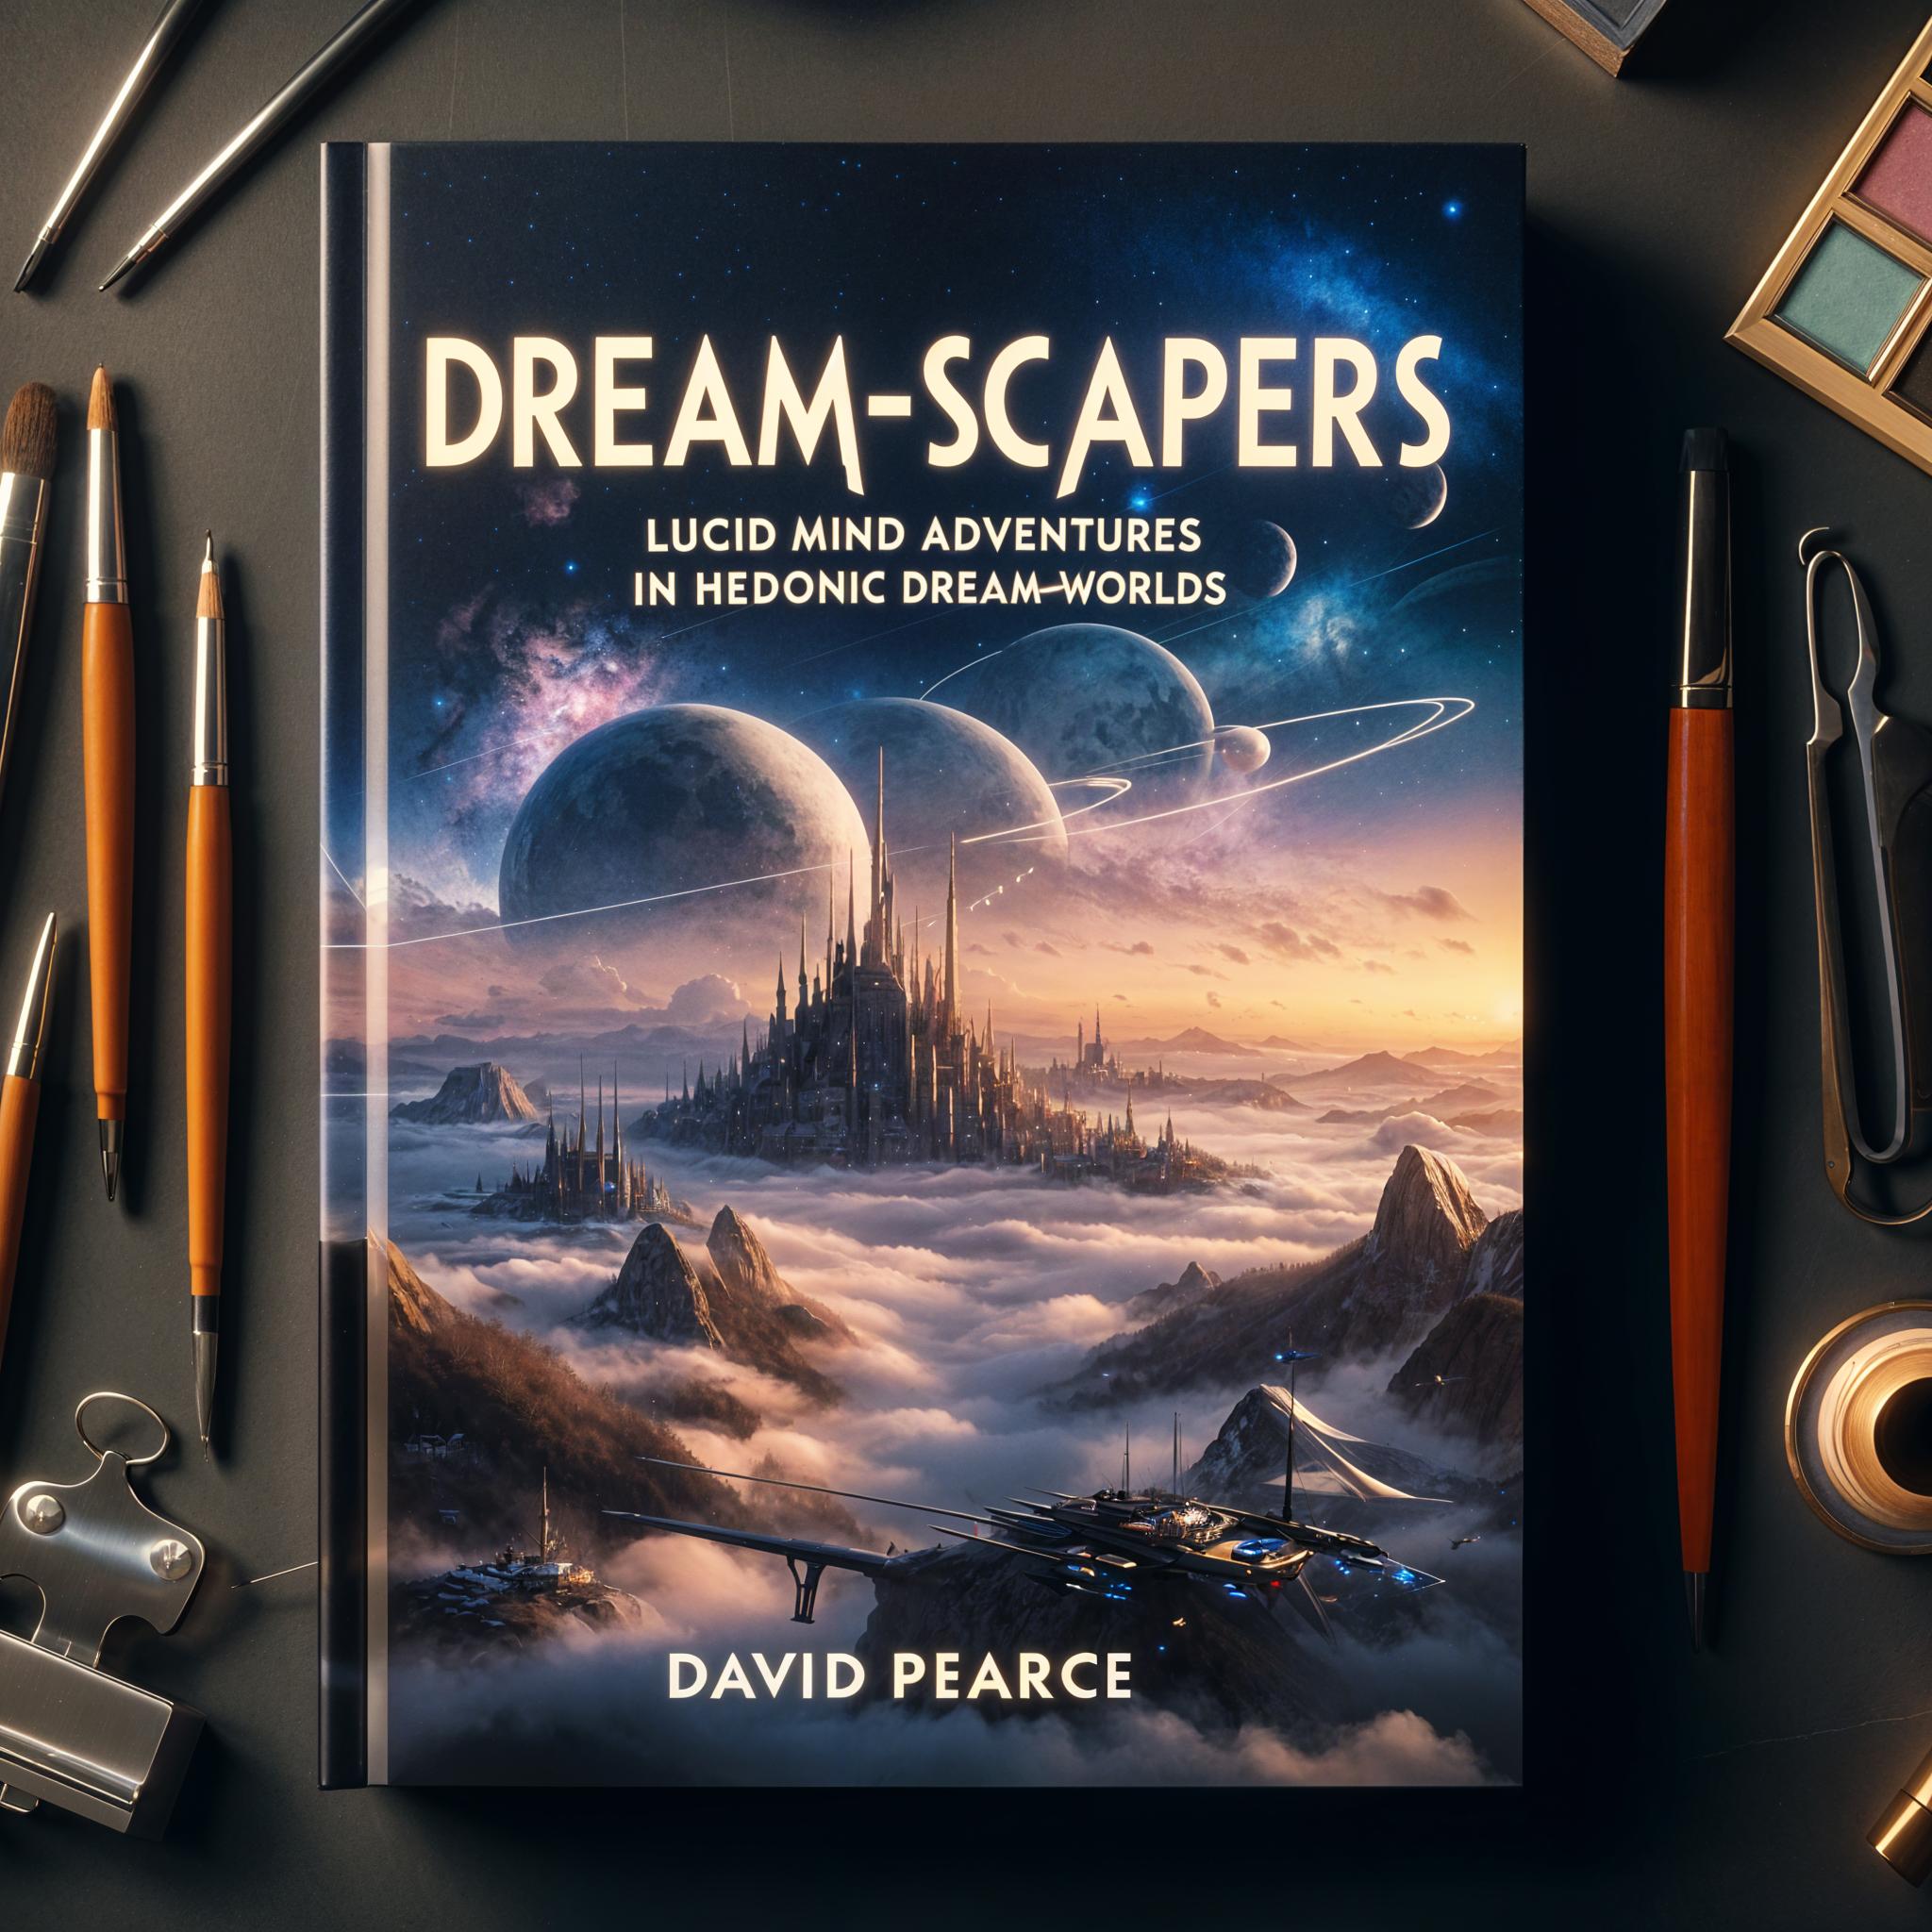 Dreamscapers: Lucid Mind Adventures in Hedonic Dreamworlds by David Pearce